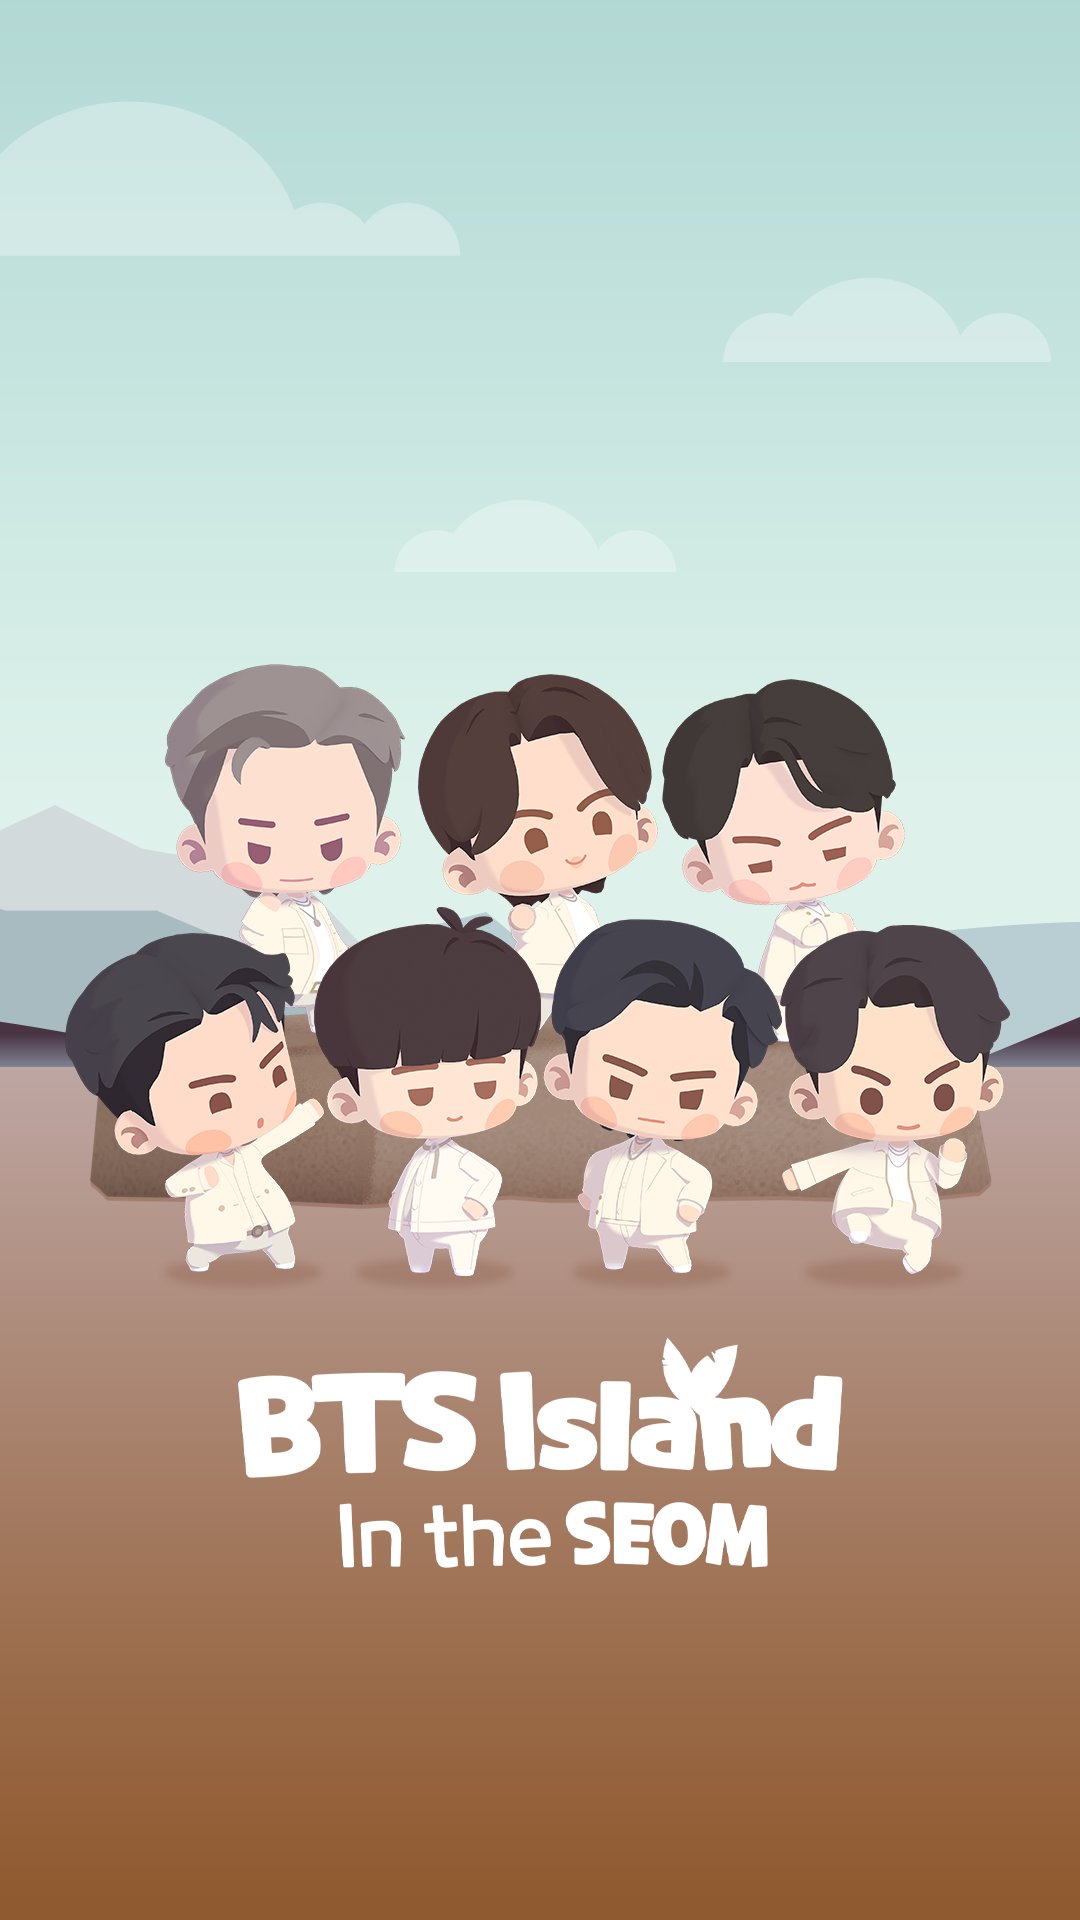 Bts Island: In The Seom On Twitter: 